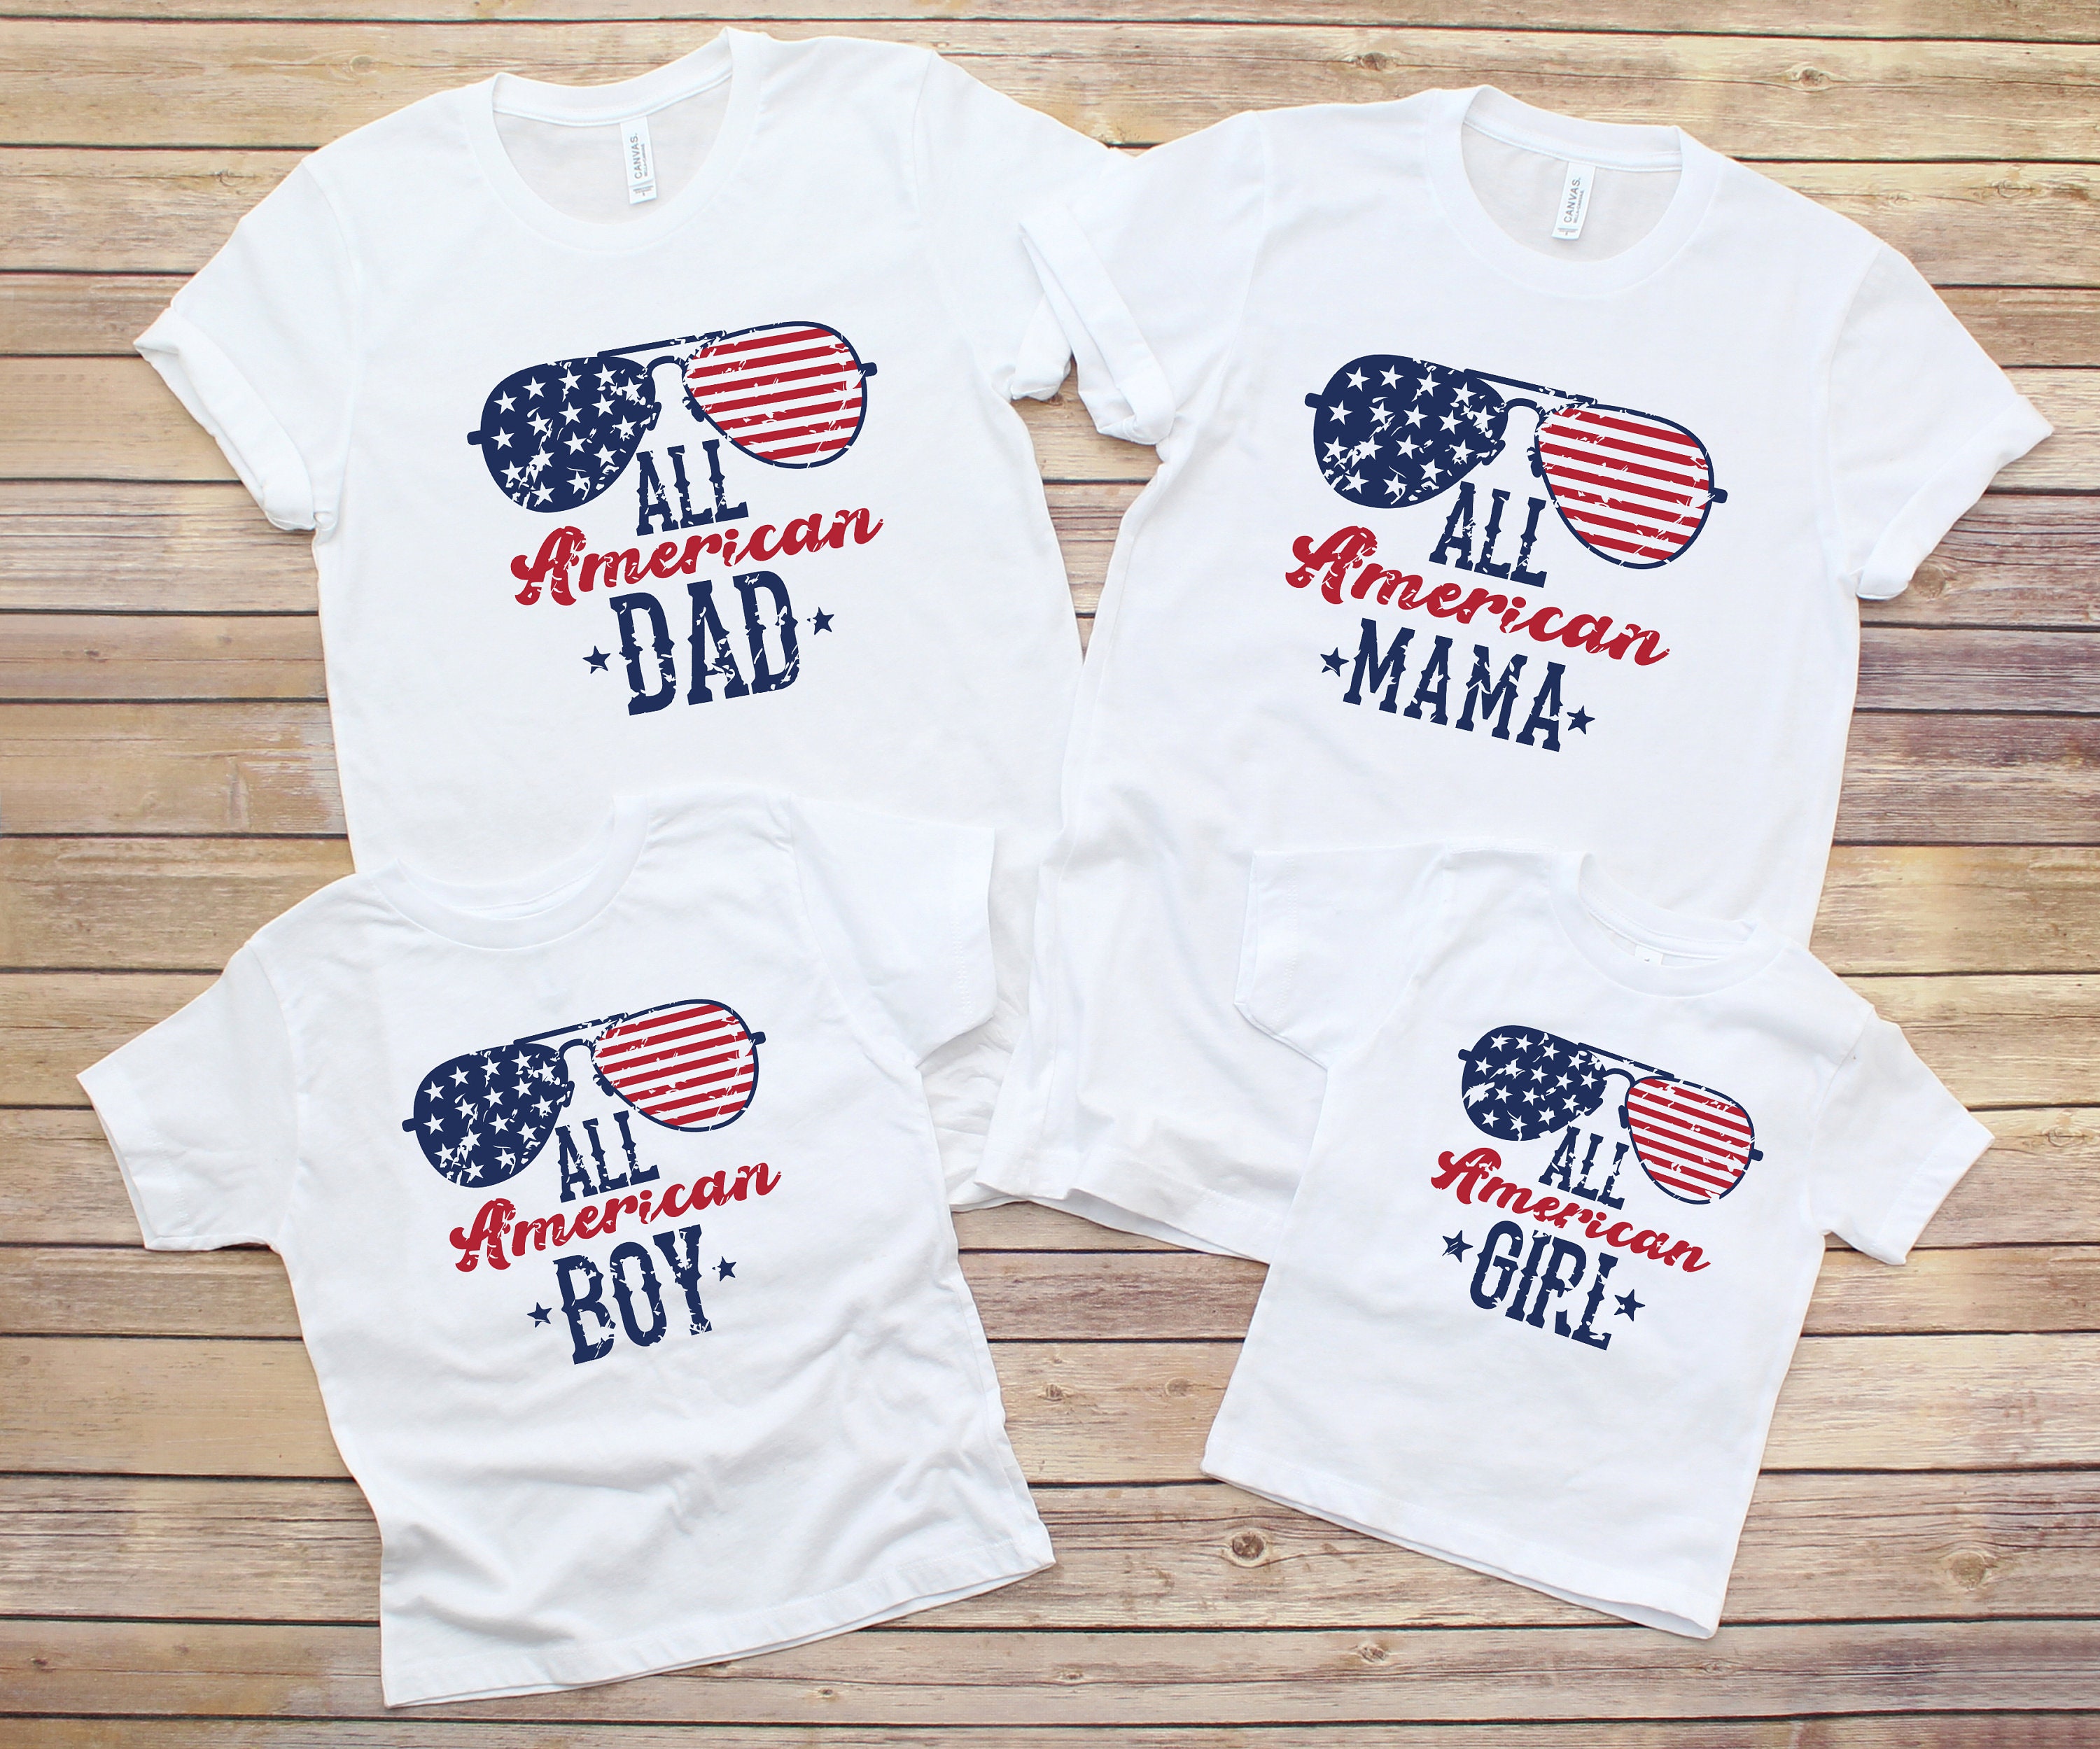 Mom Dad Baby Boy Girl 4th of July Matching Shirts 4th Of July American Family Shirts Mommy and Me Matching Shirts All American Family tee